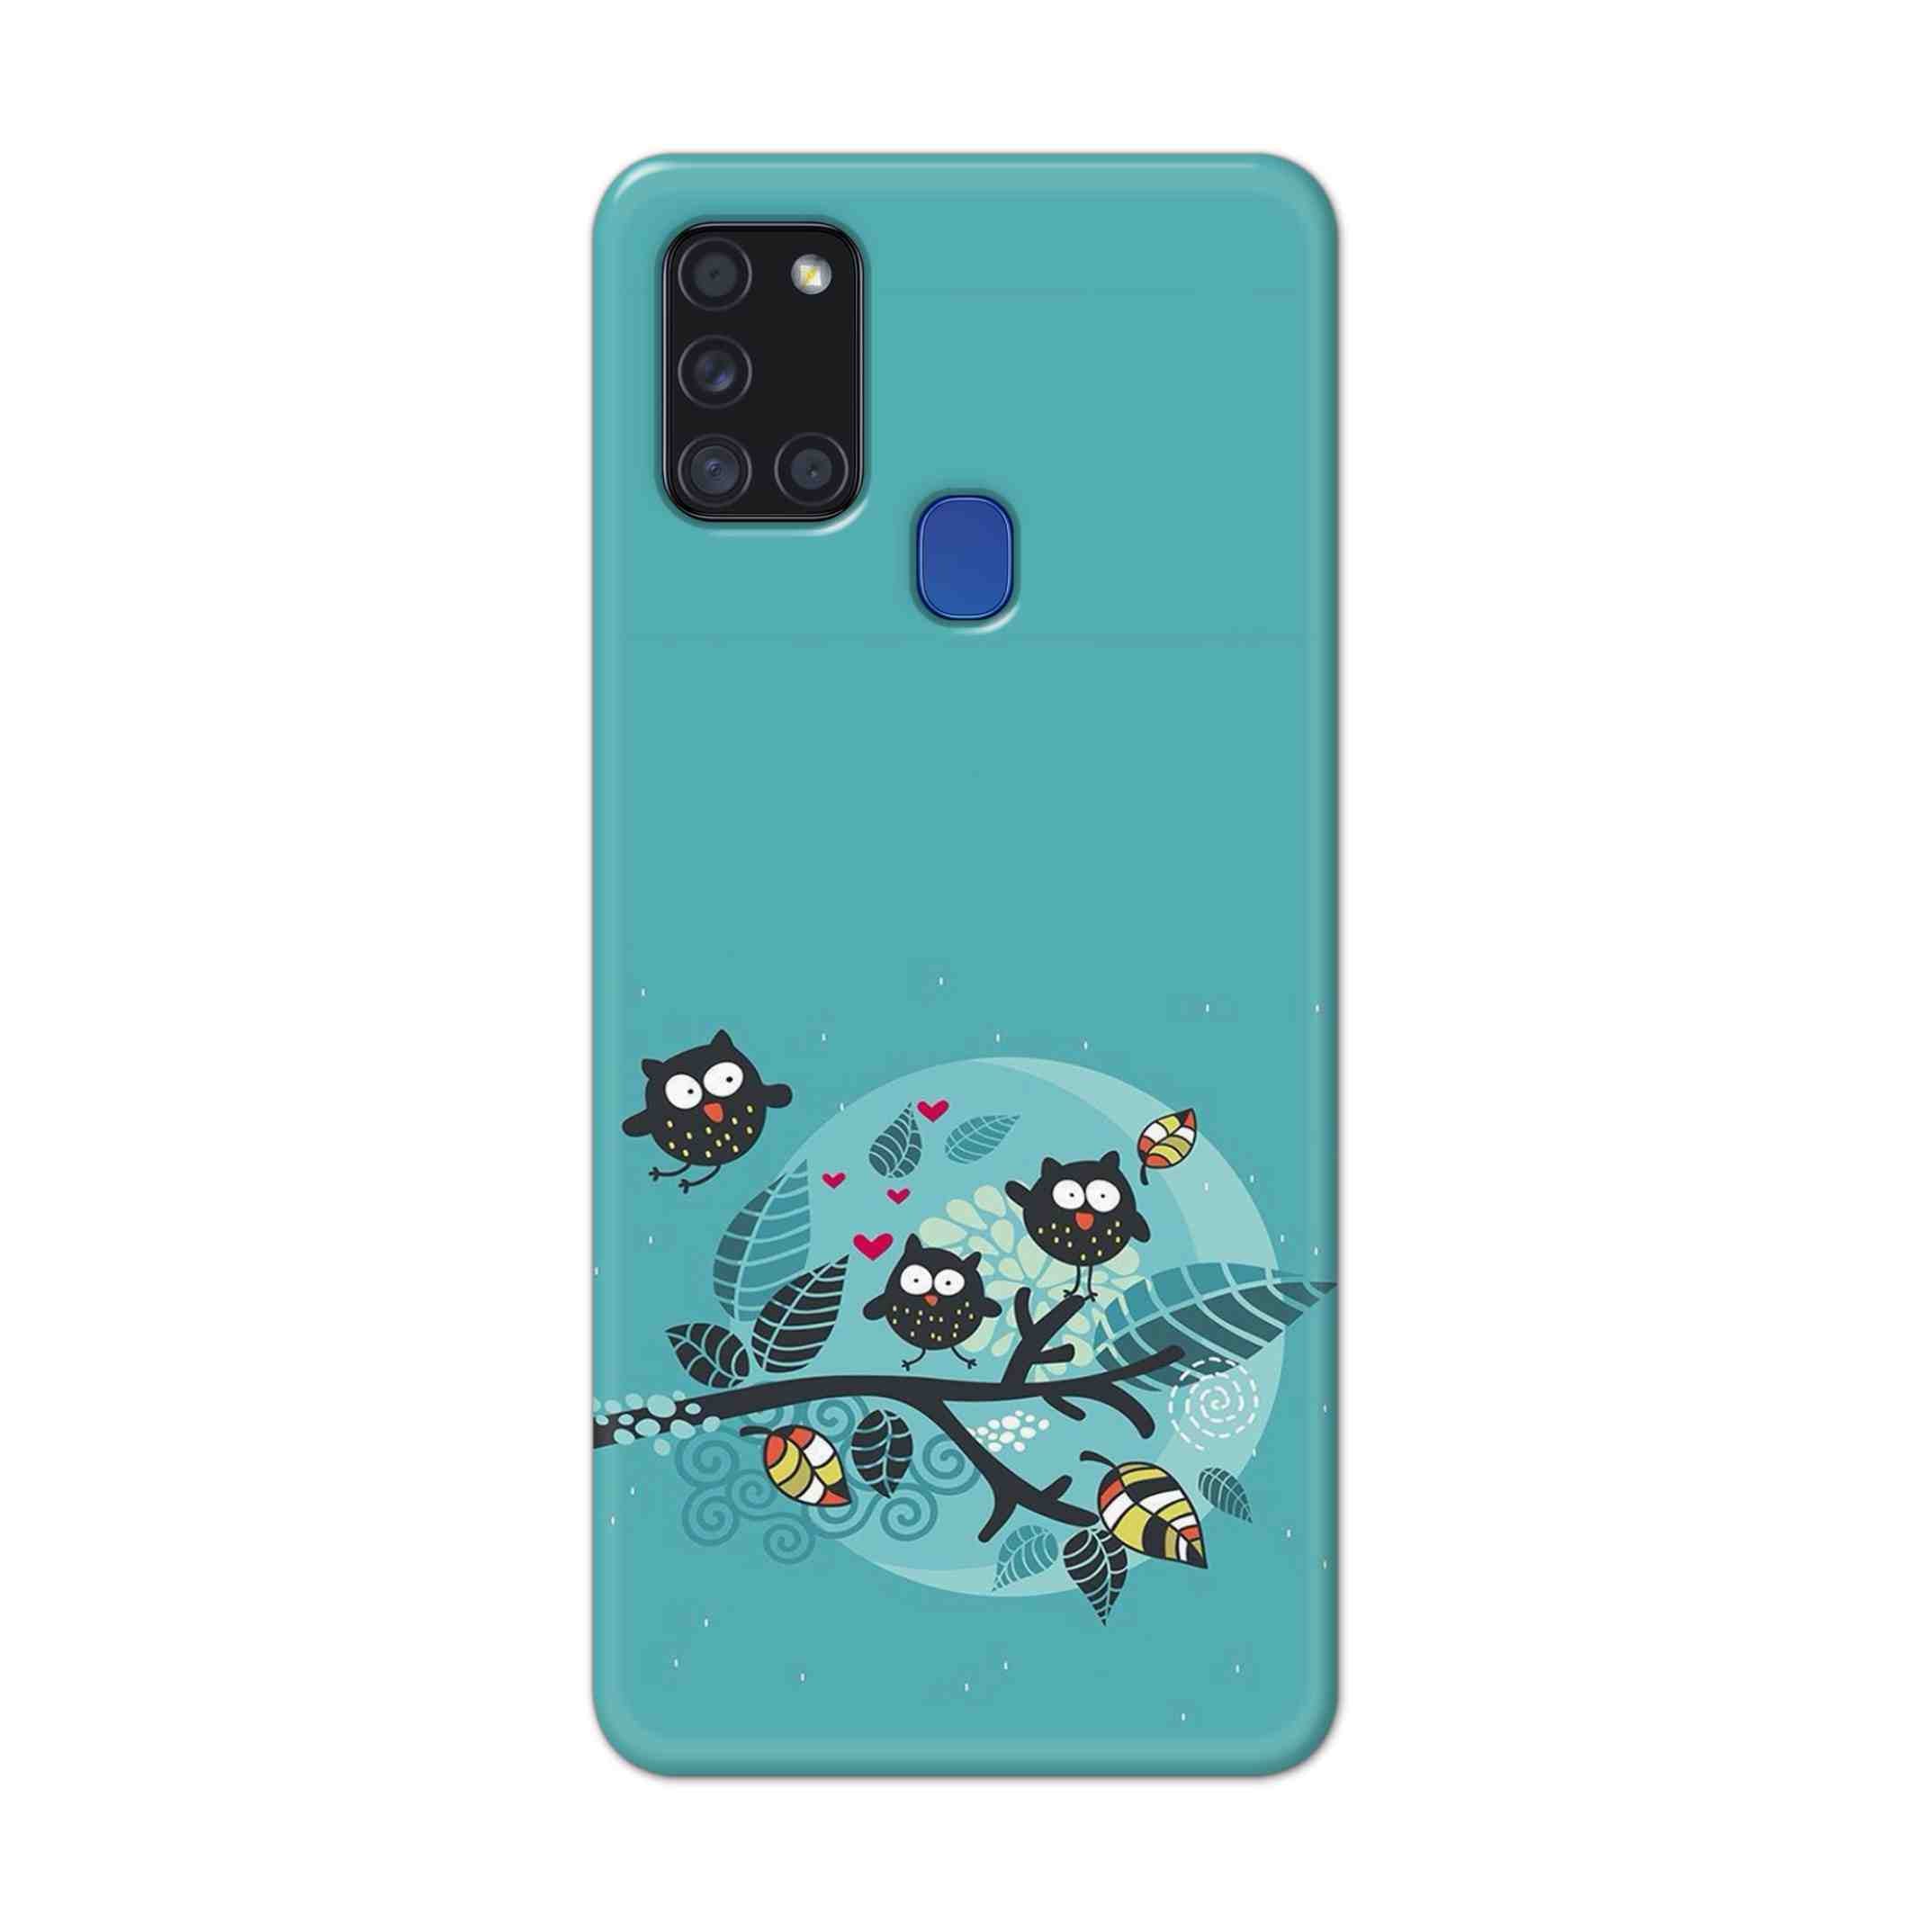 Buy Owl Hard Back Mobile Phone Case Cover For Samsung Galaxy A21s Online